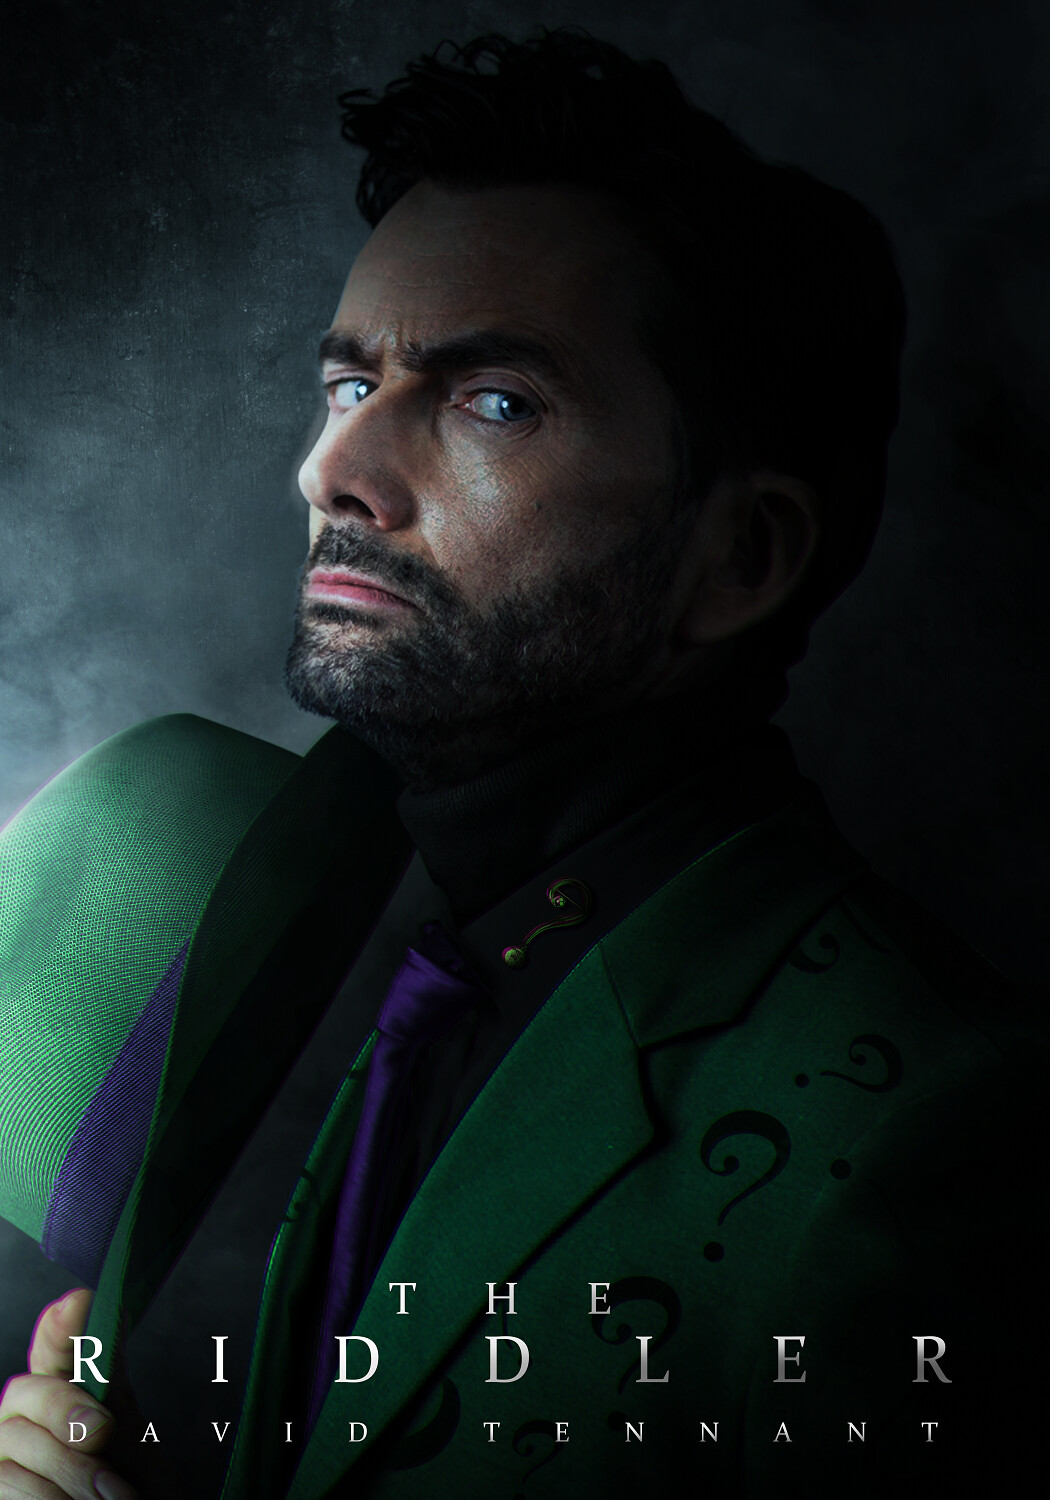 Always seen David Tennant as the perfect pick for the role of Riddler in an...